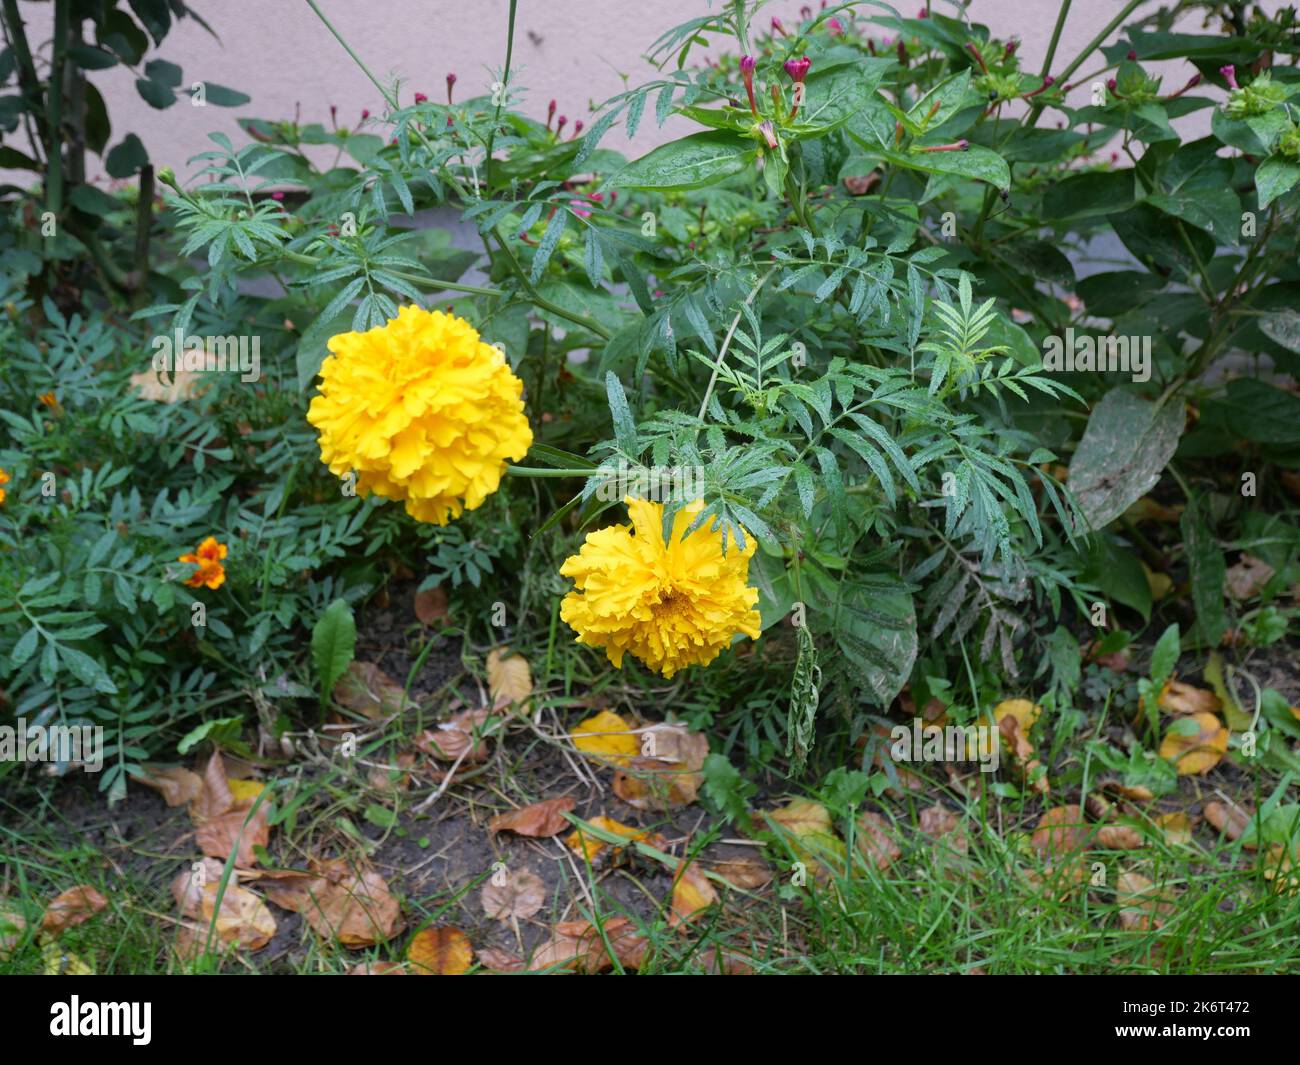 Tagetes or marigold plants, small bushes with green leaves and yellow and orange flower heads. Stock Photo